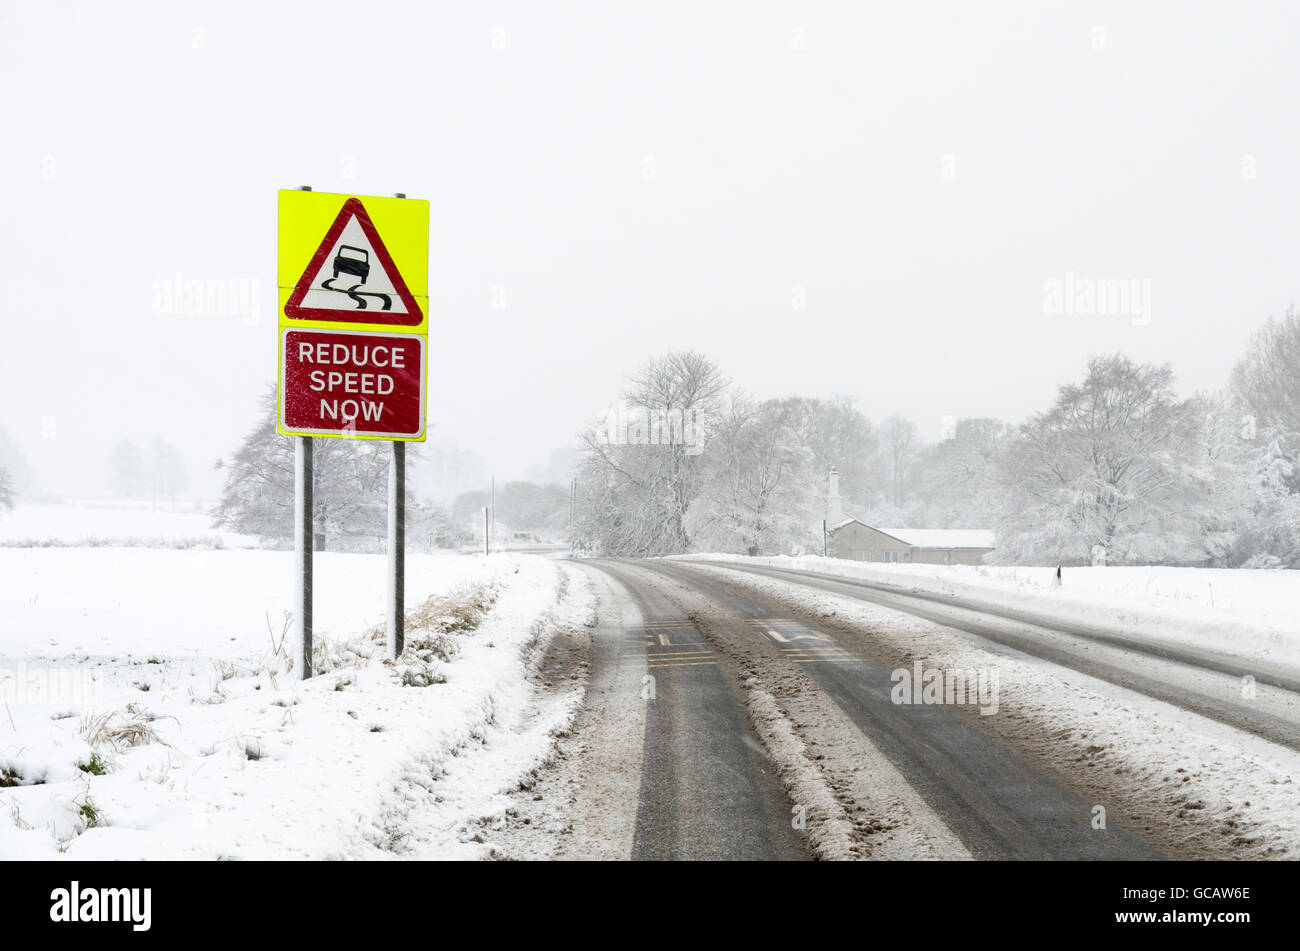 A slippery surface warning road sign on the side of a rural road while it is snowing with snow on the ground. Stock Photo